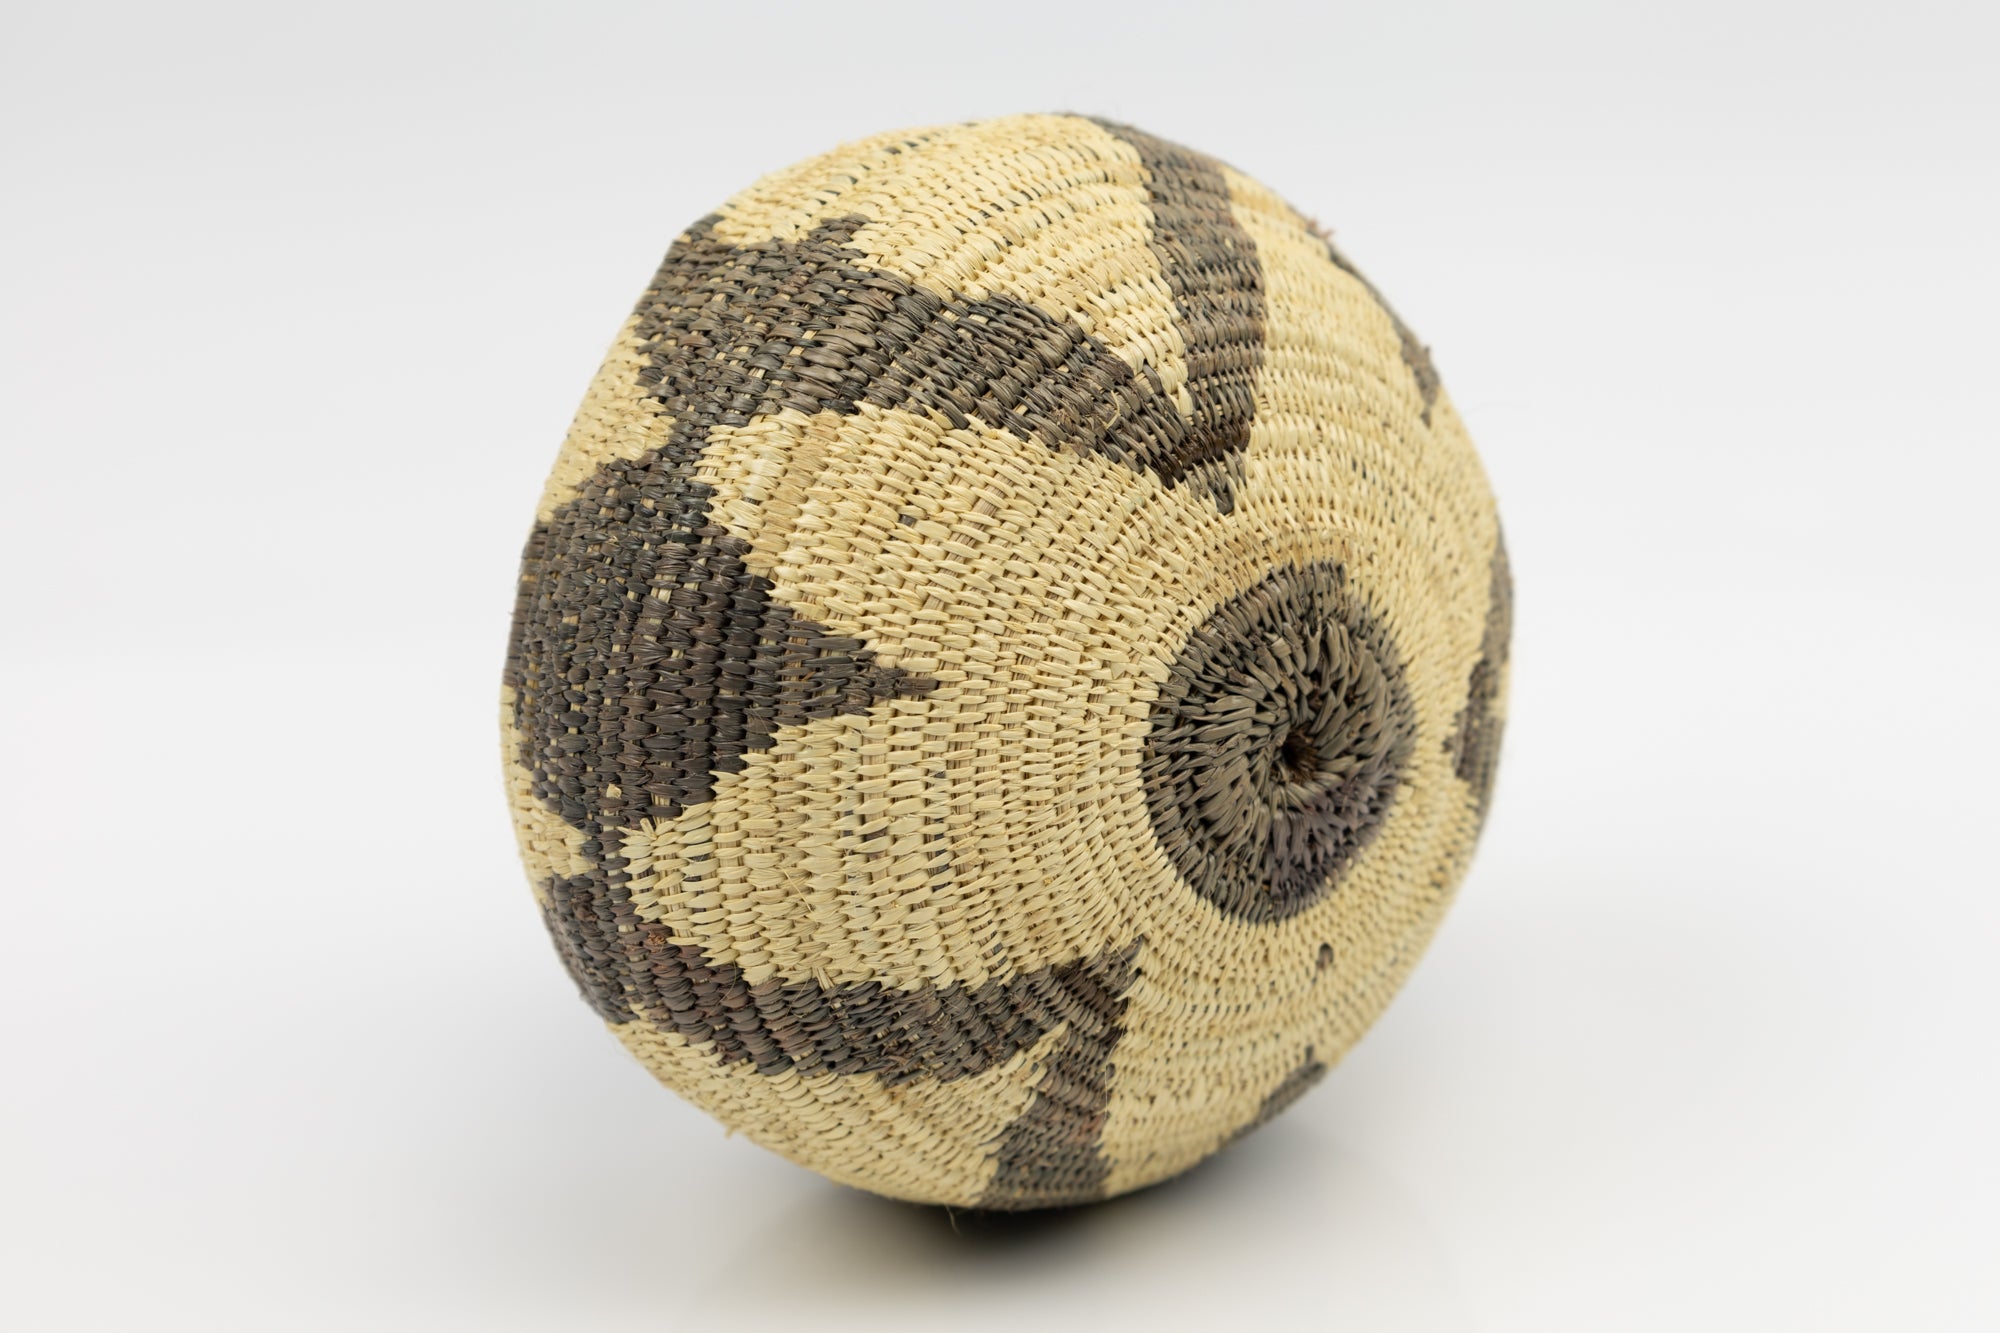 Hand Woven Vintage Basket Made By Indigenous Artisans